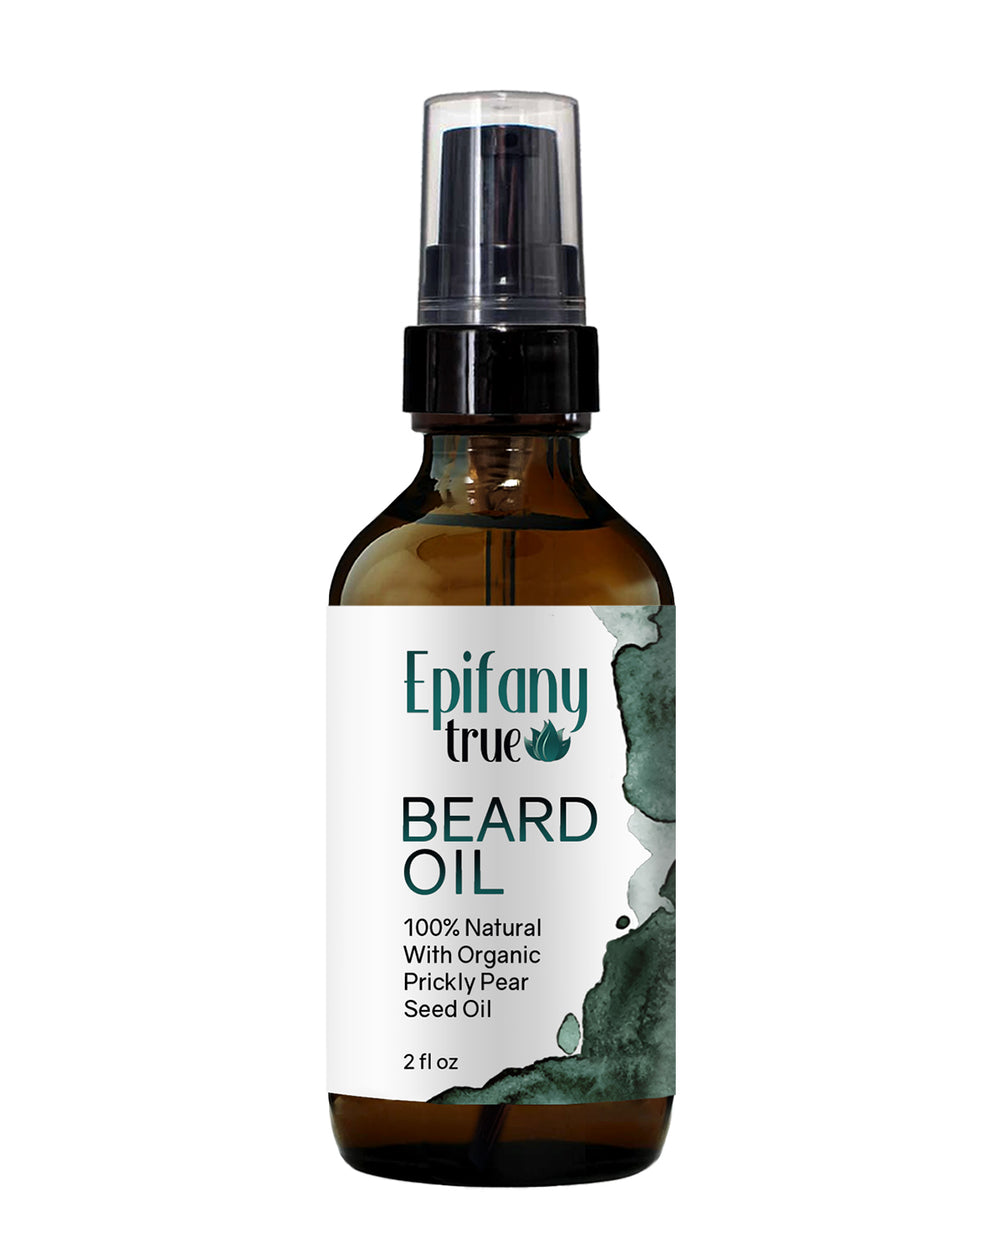 Epifany True 100% Natural Beard Oil 2oz with Prickly Pear Seed Oil